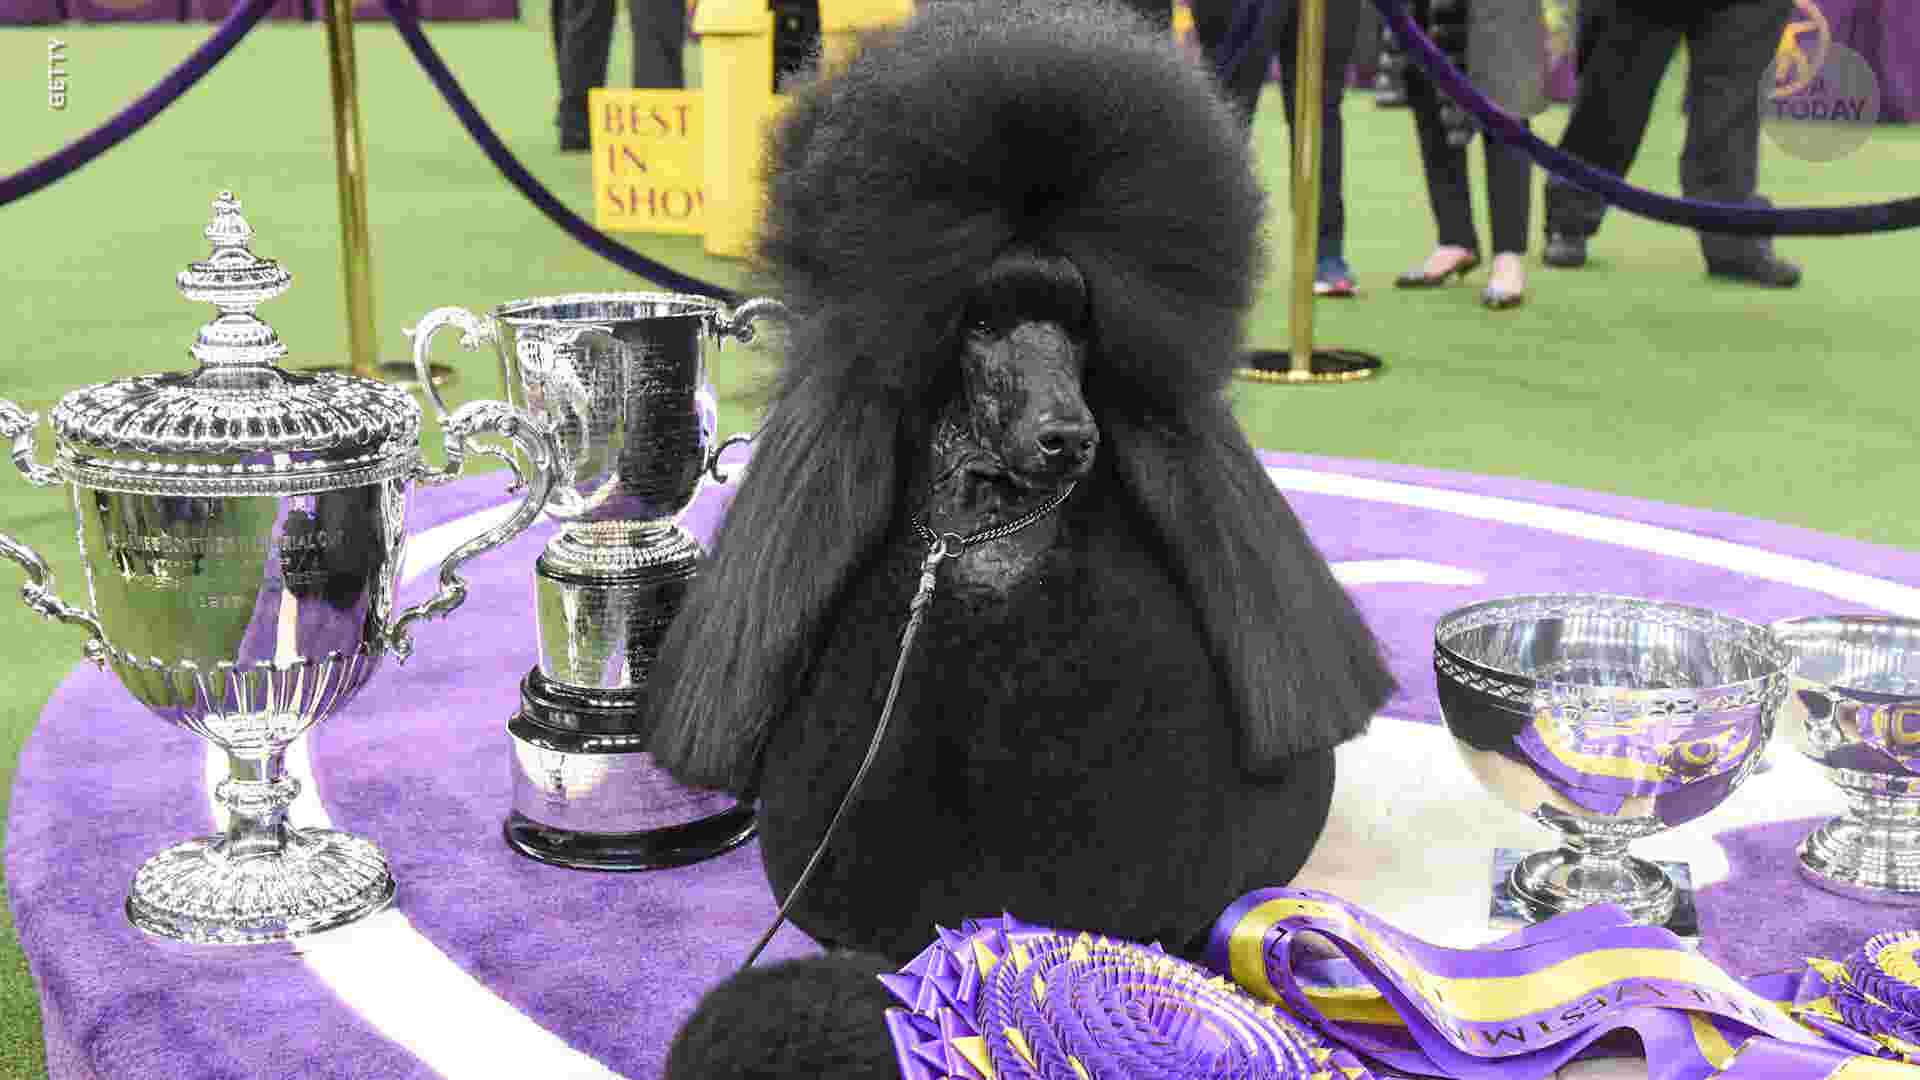 Westminster Dog Show's Best in Show is Siba the standard poodle